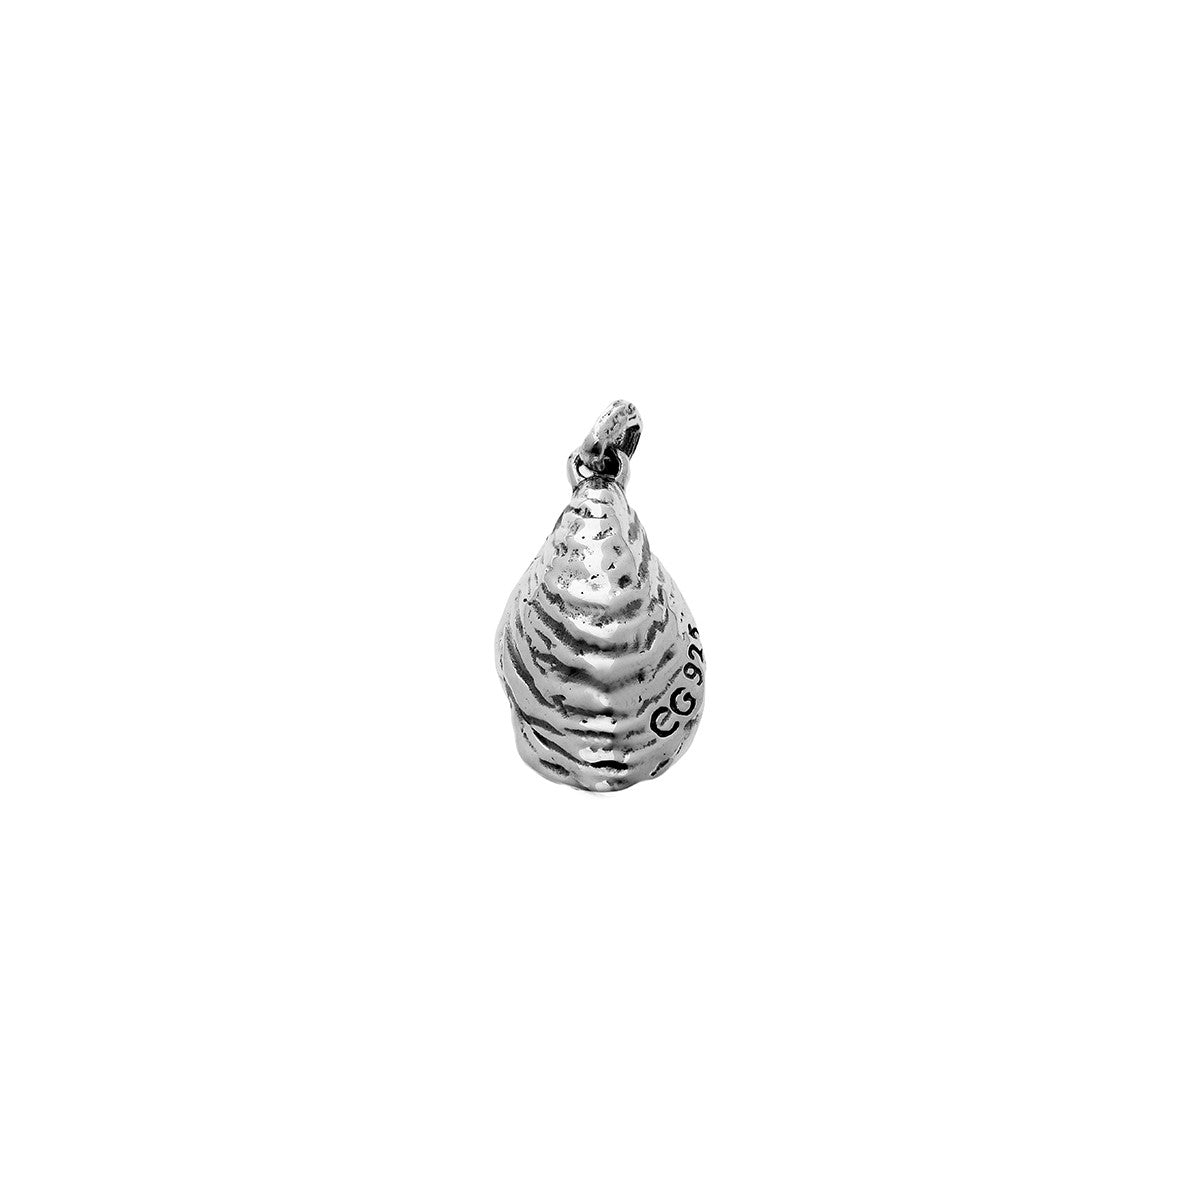 Oy! Oy! Oyster On A Half Shell Sterling Silver Charm - Cynthia Gale New York Jewelry